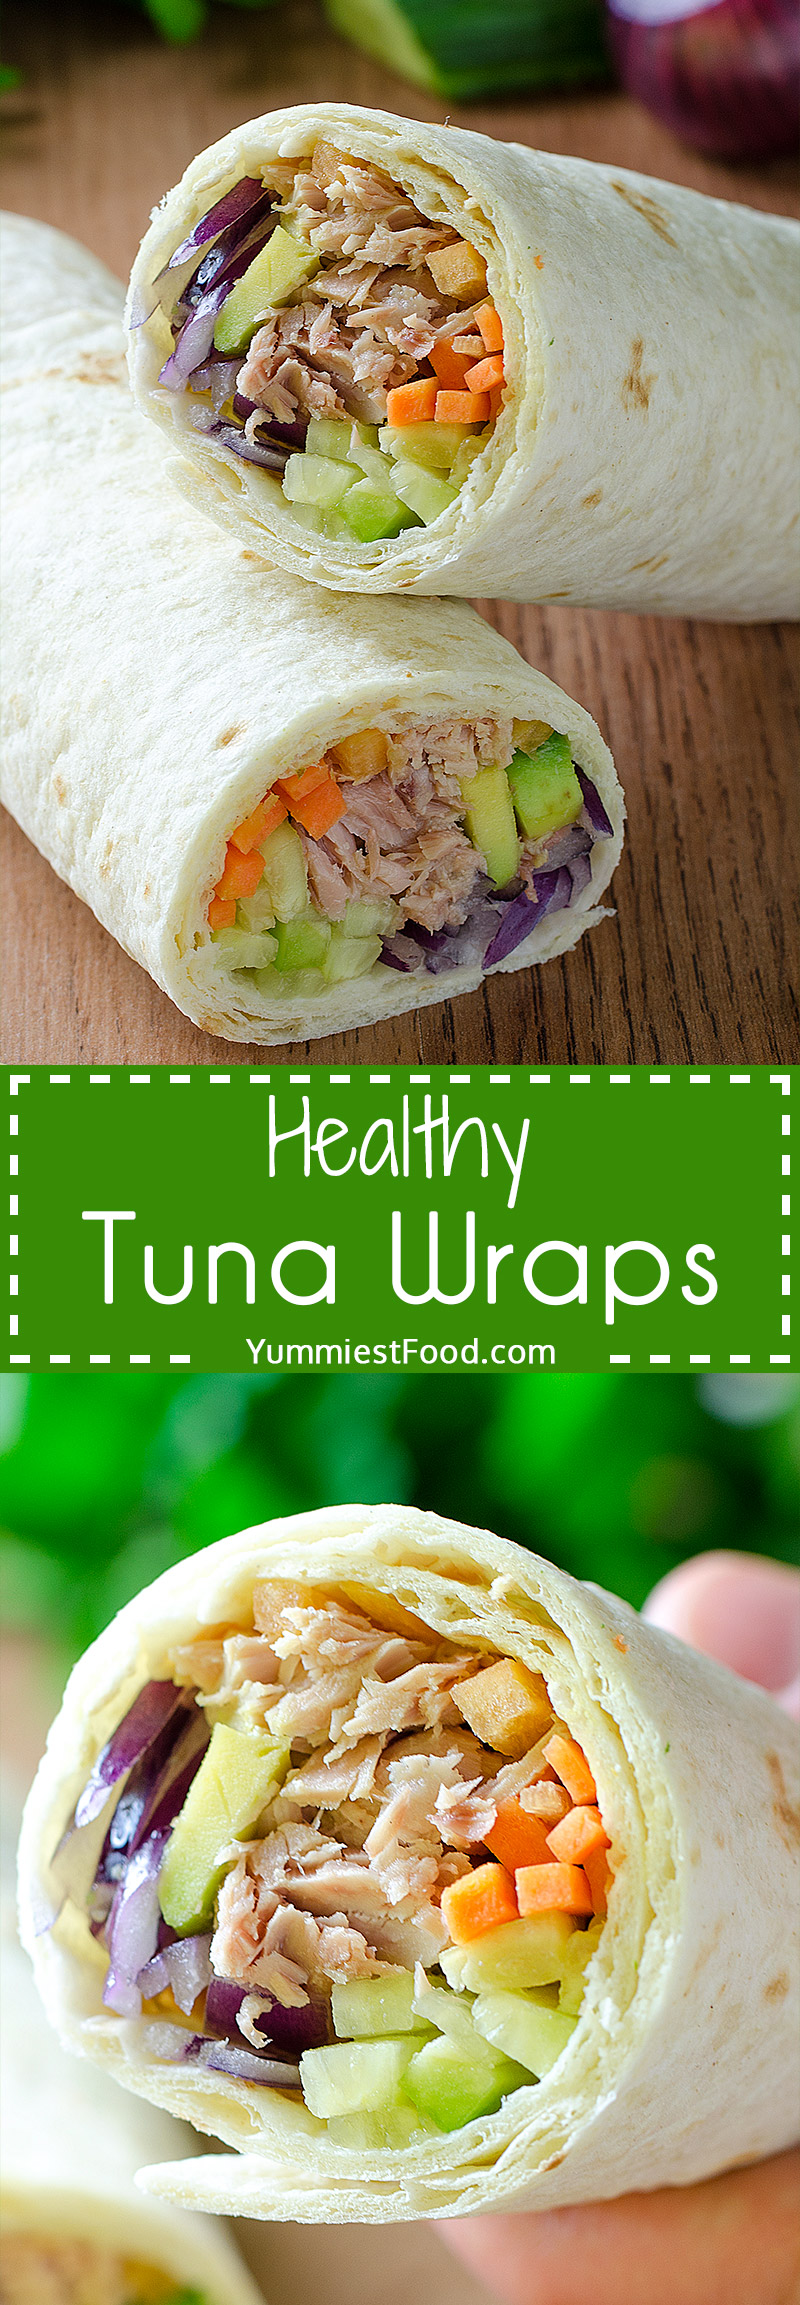 Healthy Tuna Wraps - For 10 minutes you can make so healthy, easy and tasty recipe.